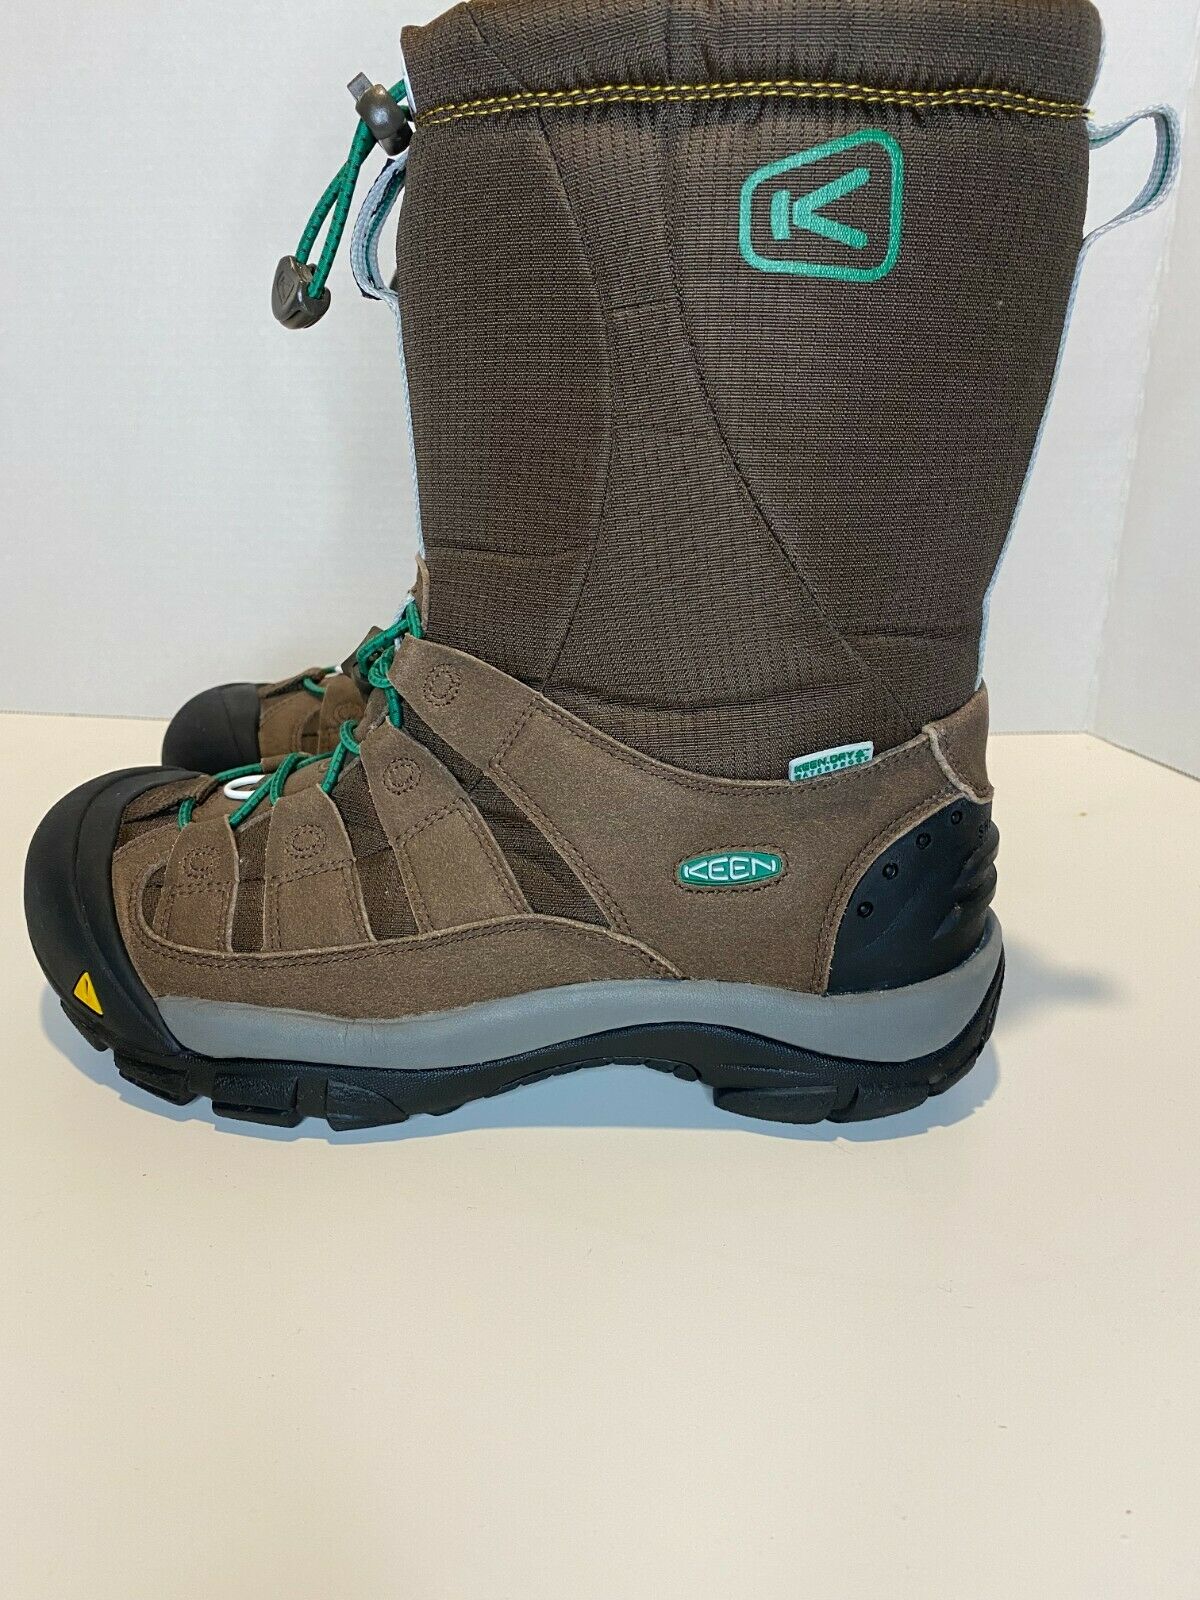 Keen Womens 200 Gram Insulation Brown Leather Winter Snow Hiking Boots Size 9